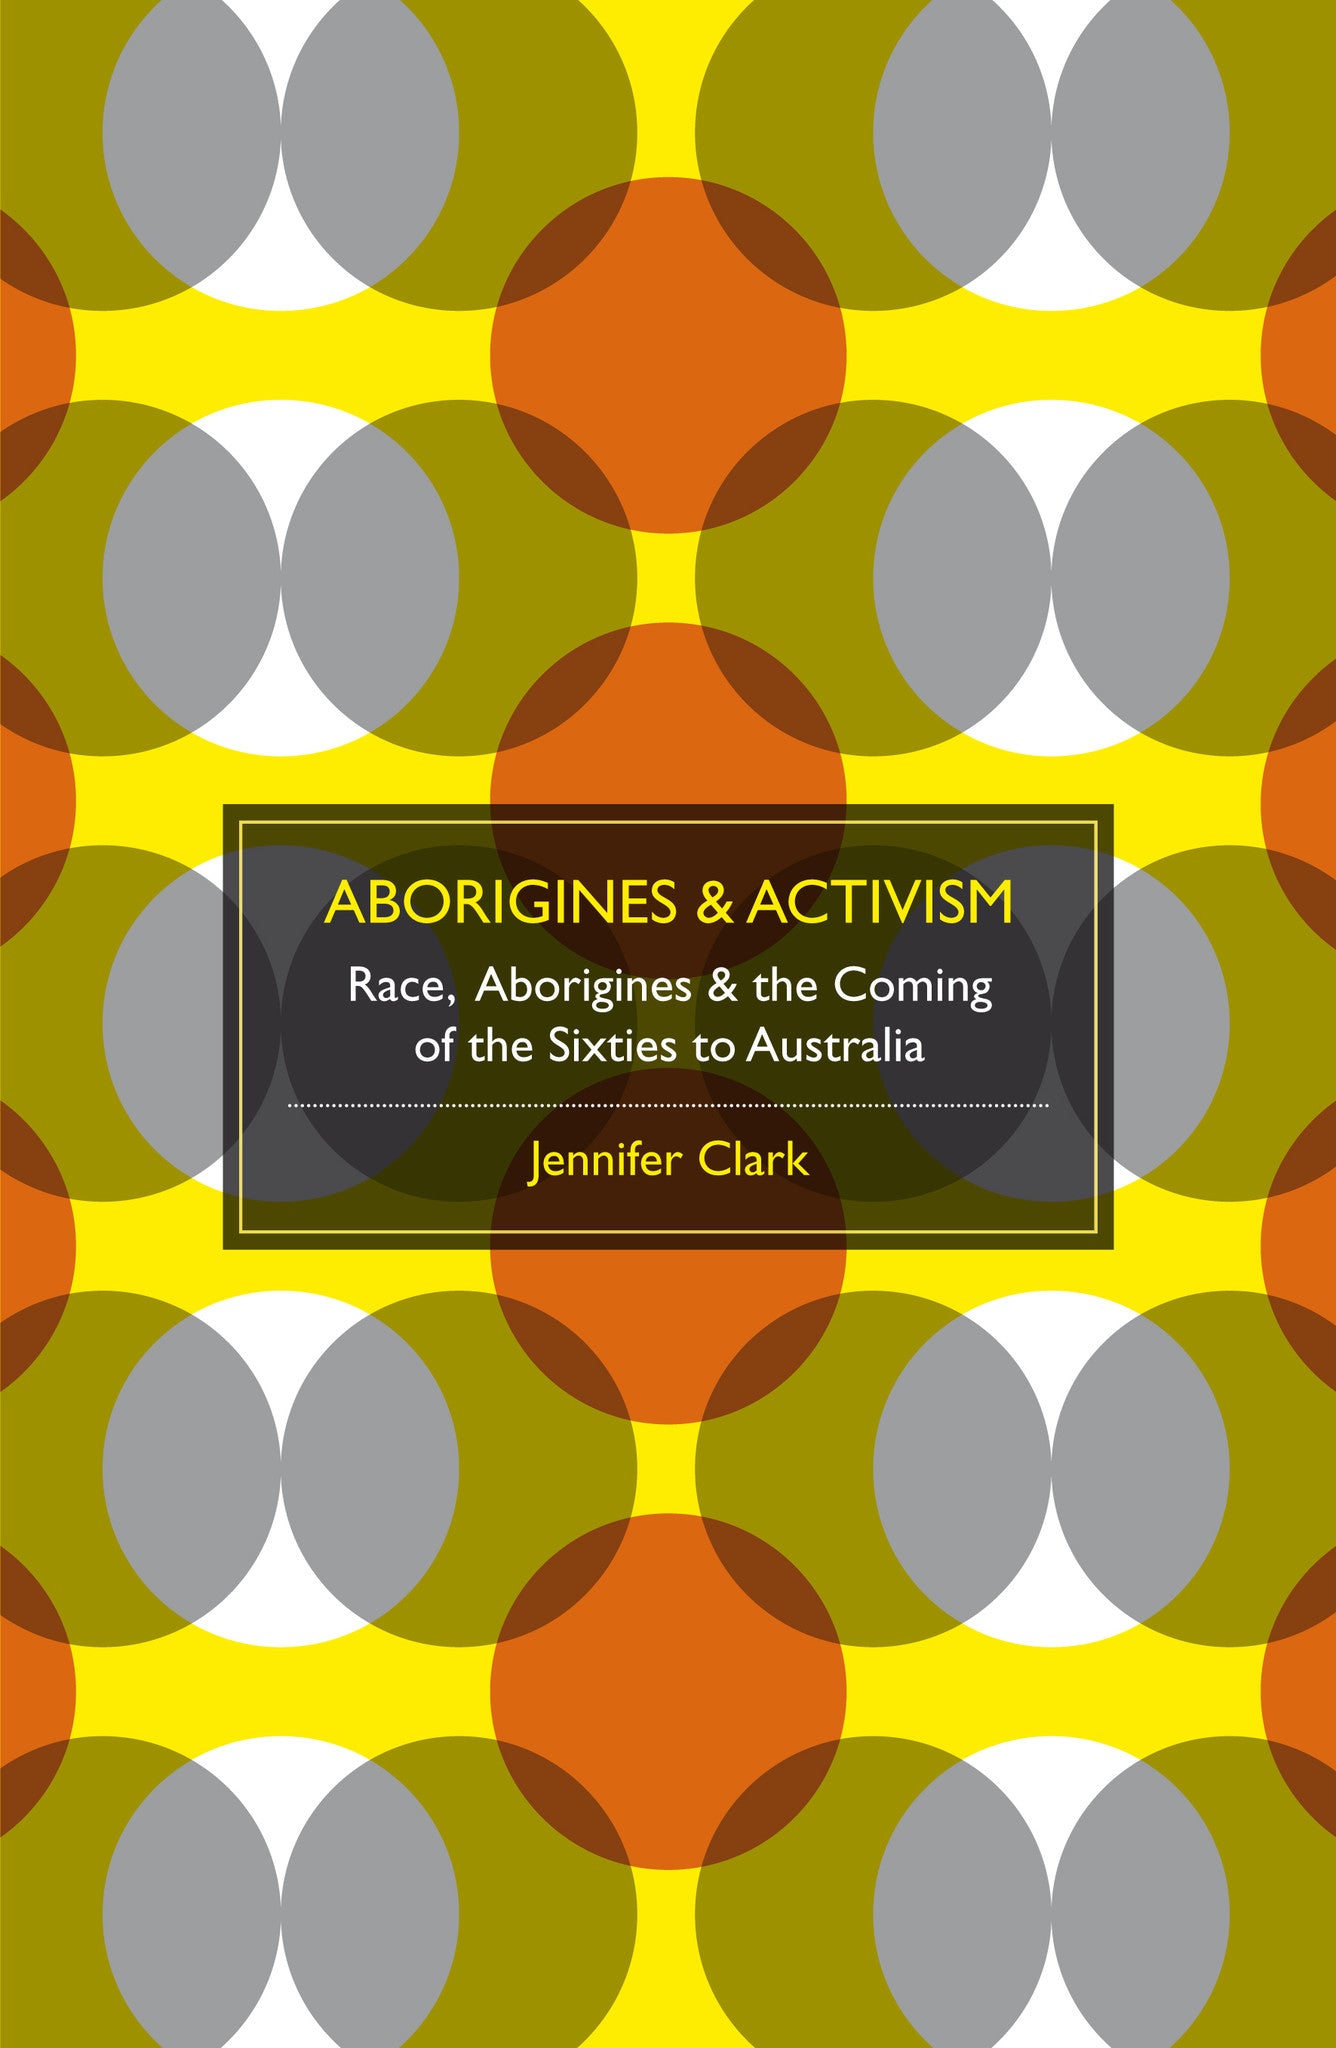 Aborigines & Activism: Race, Aborigines and the Coming of the Sixties to Australia